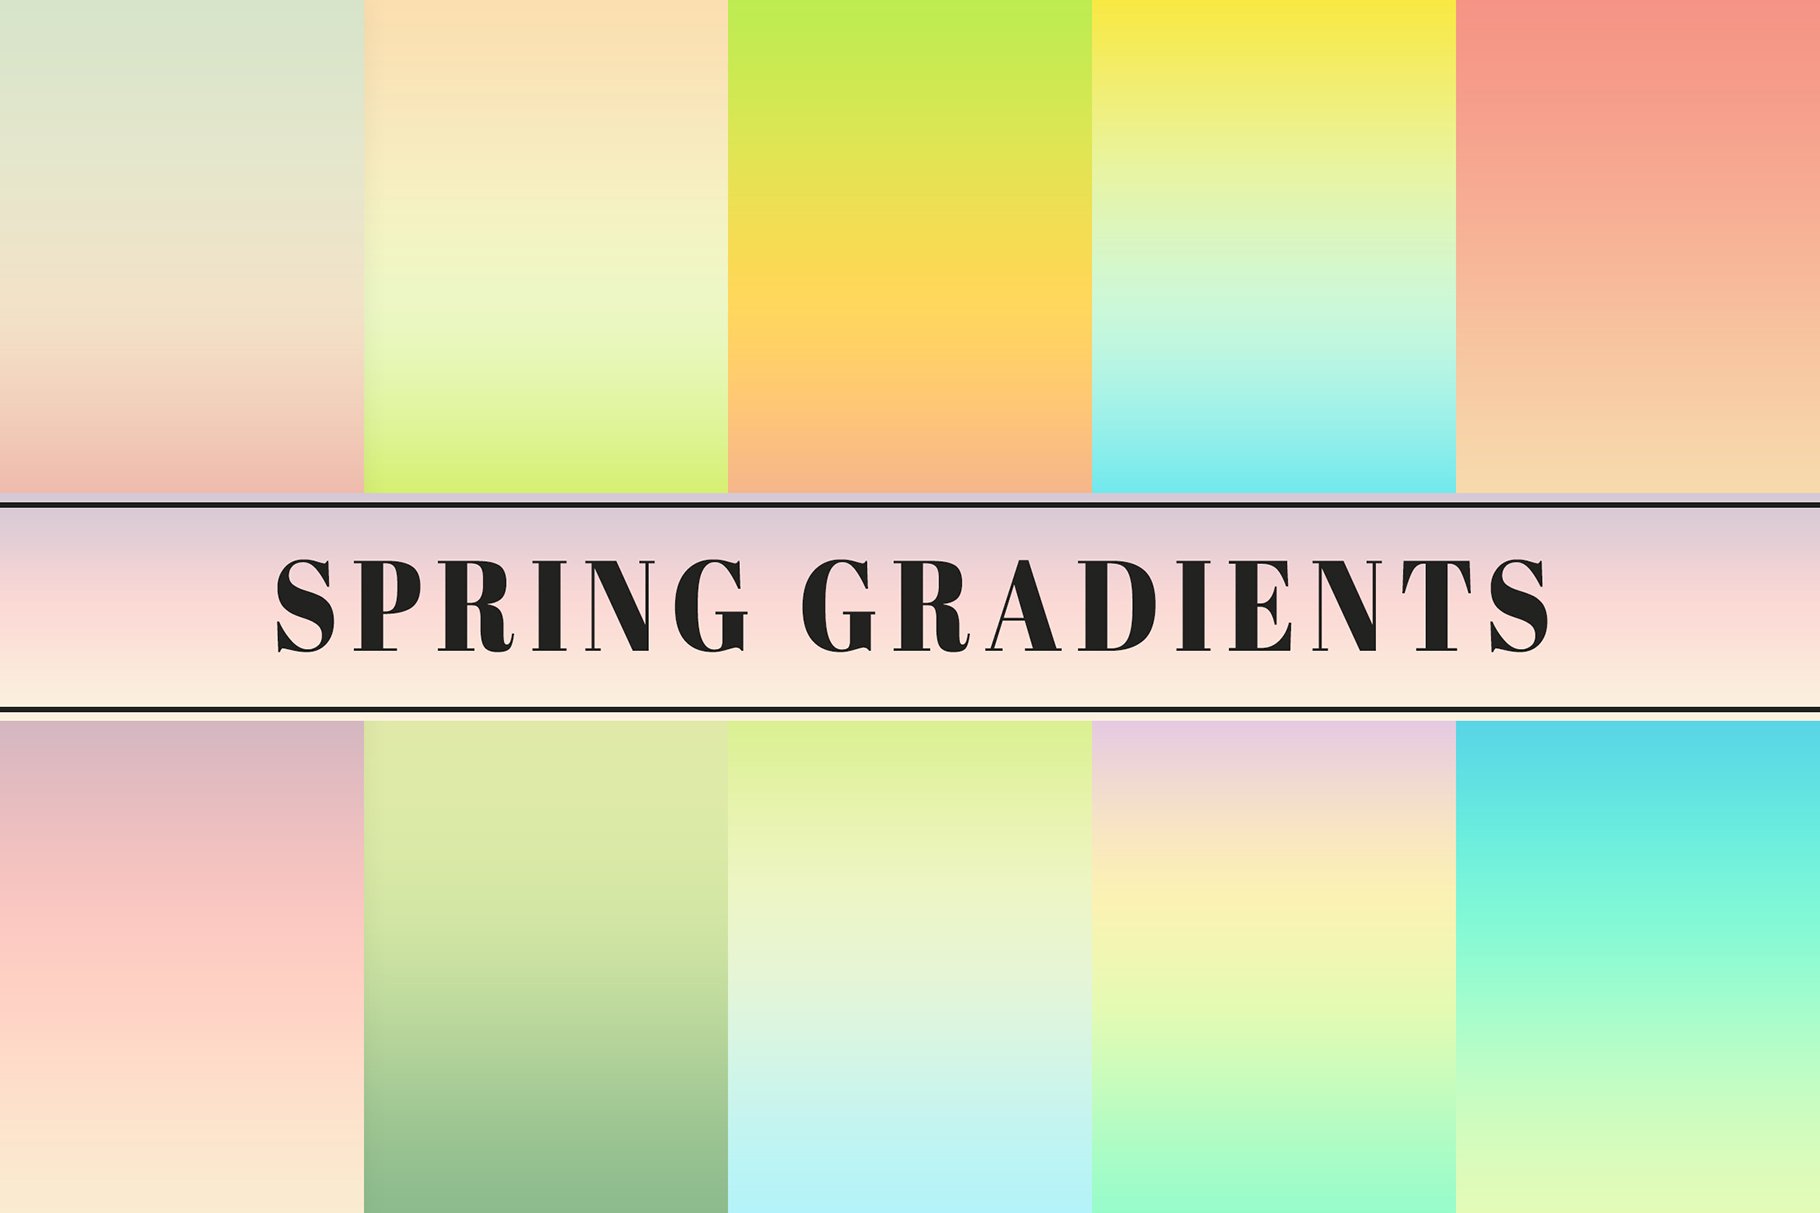 Spring Gradients cover image.